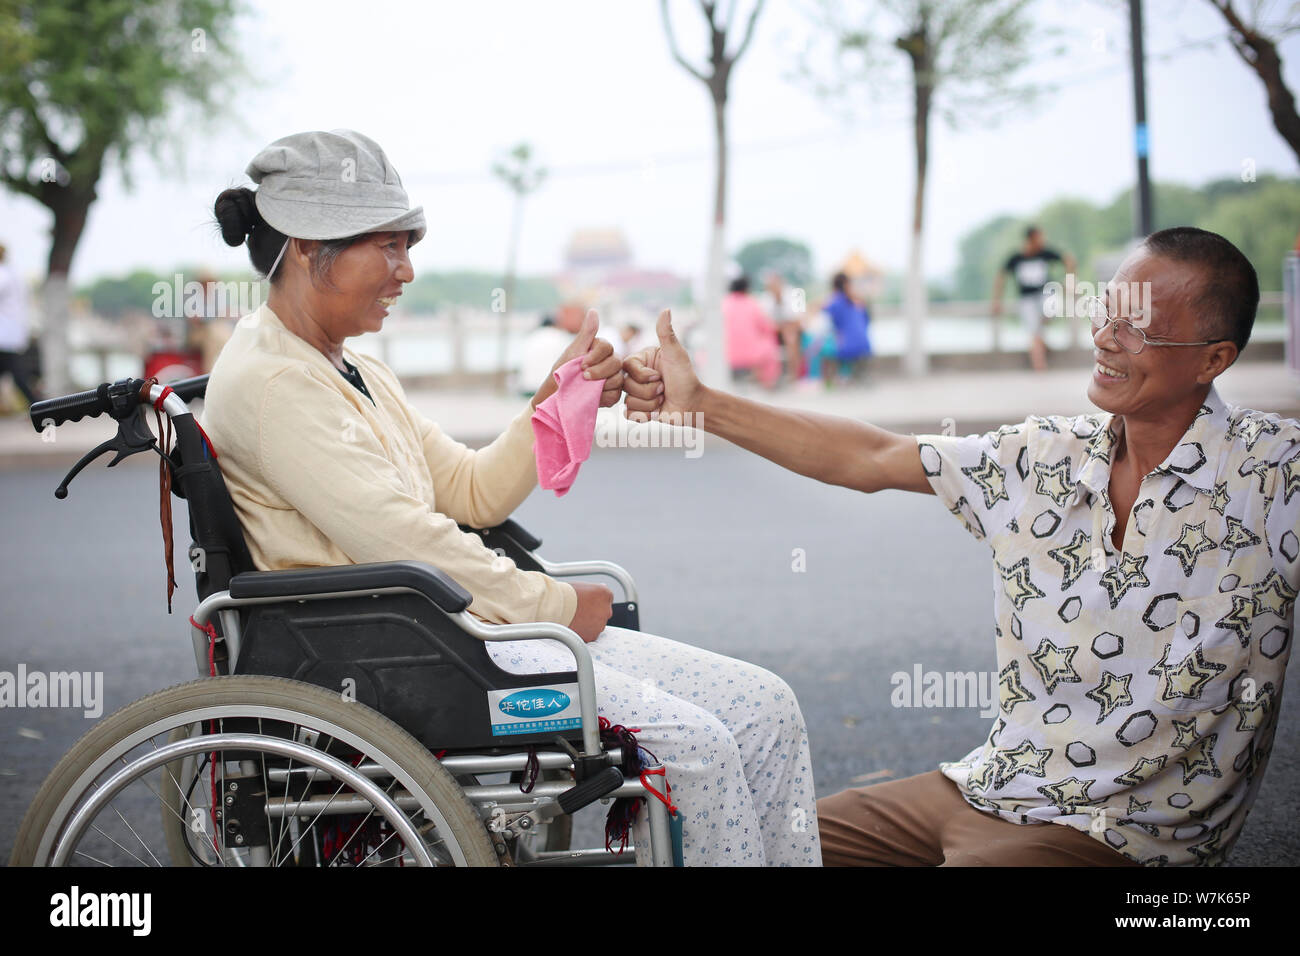 Chinese man Guo Jingxin interacts with his paralyzed wife in Zhengzhou city, central China's Henan province, 25 August 2017.   A Chinese man has turne Stock Photo